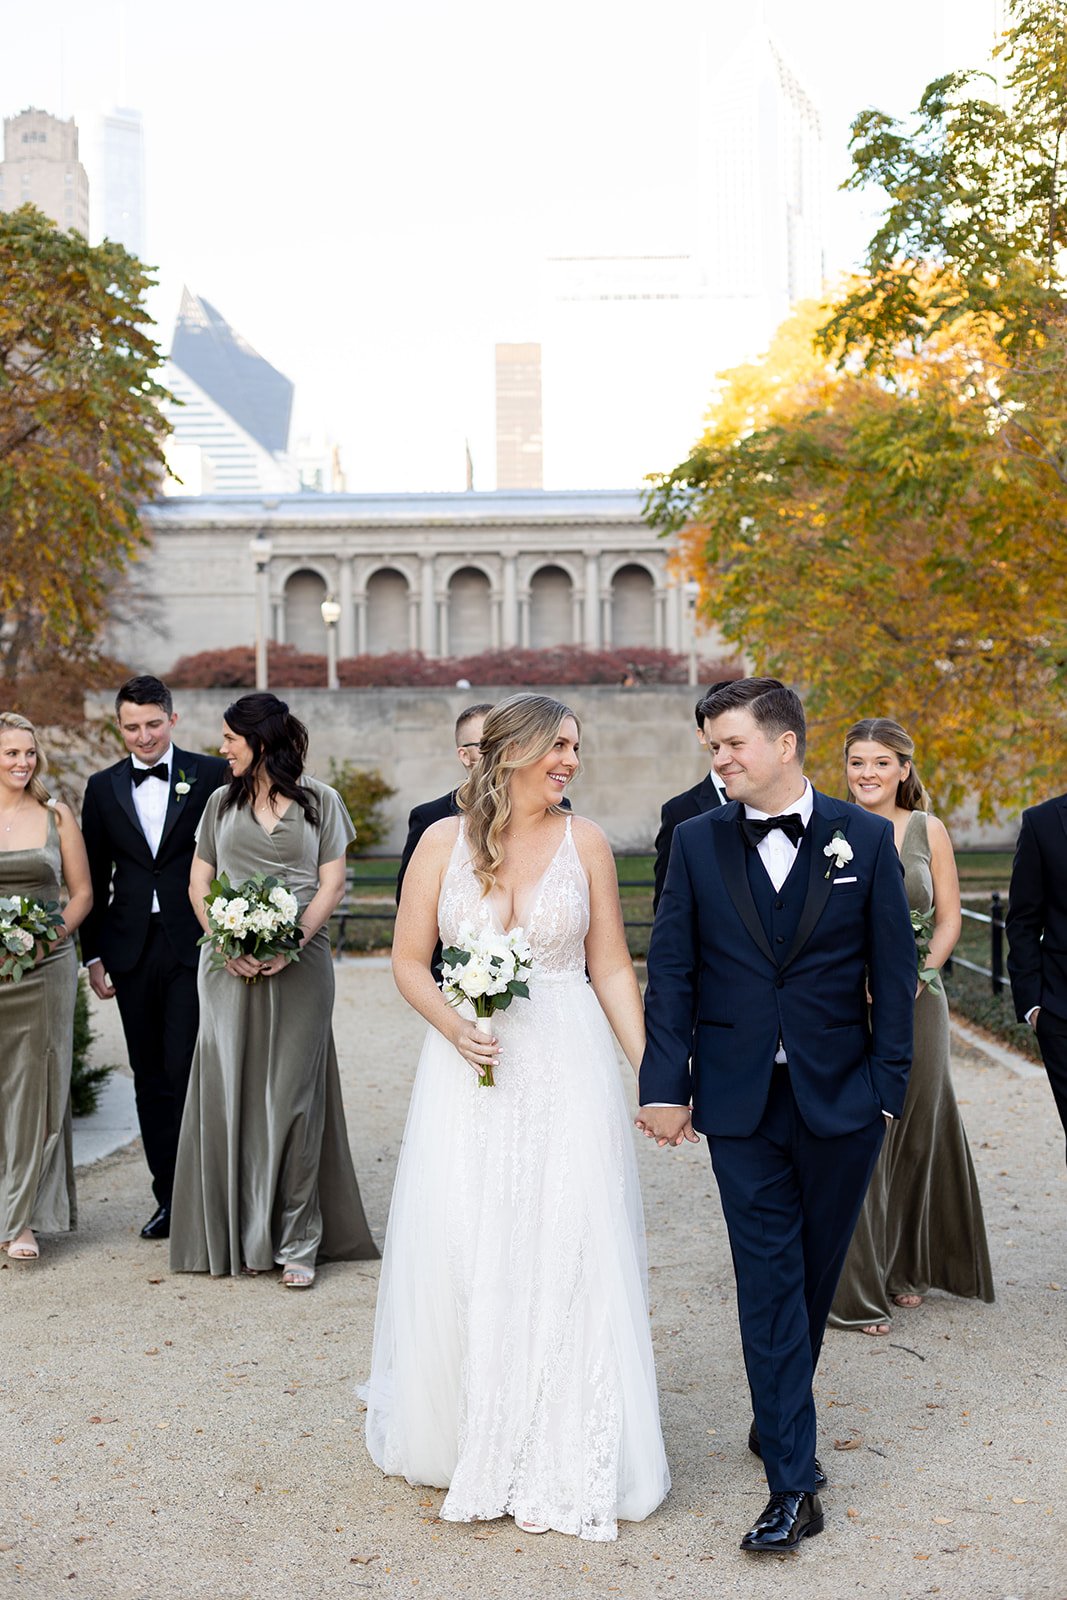 Meghan and Chris PREVIEWS - Natalie Probst Photography010.jpg